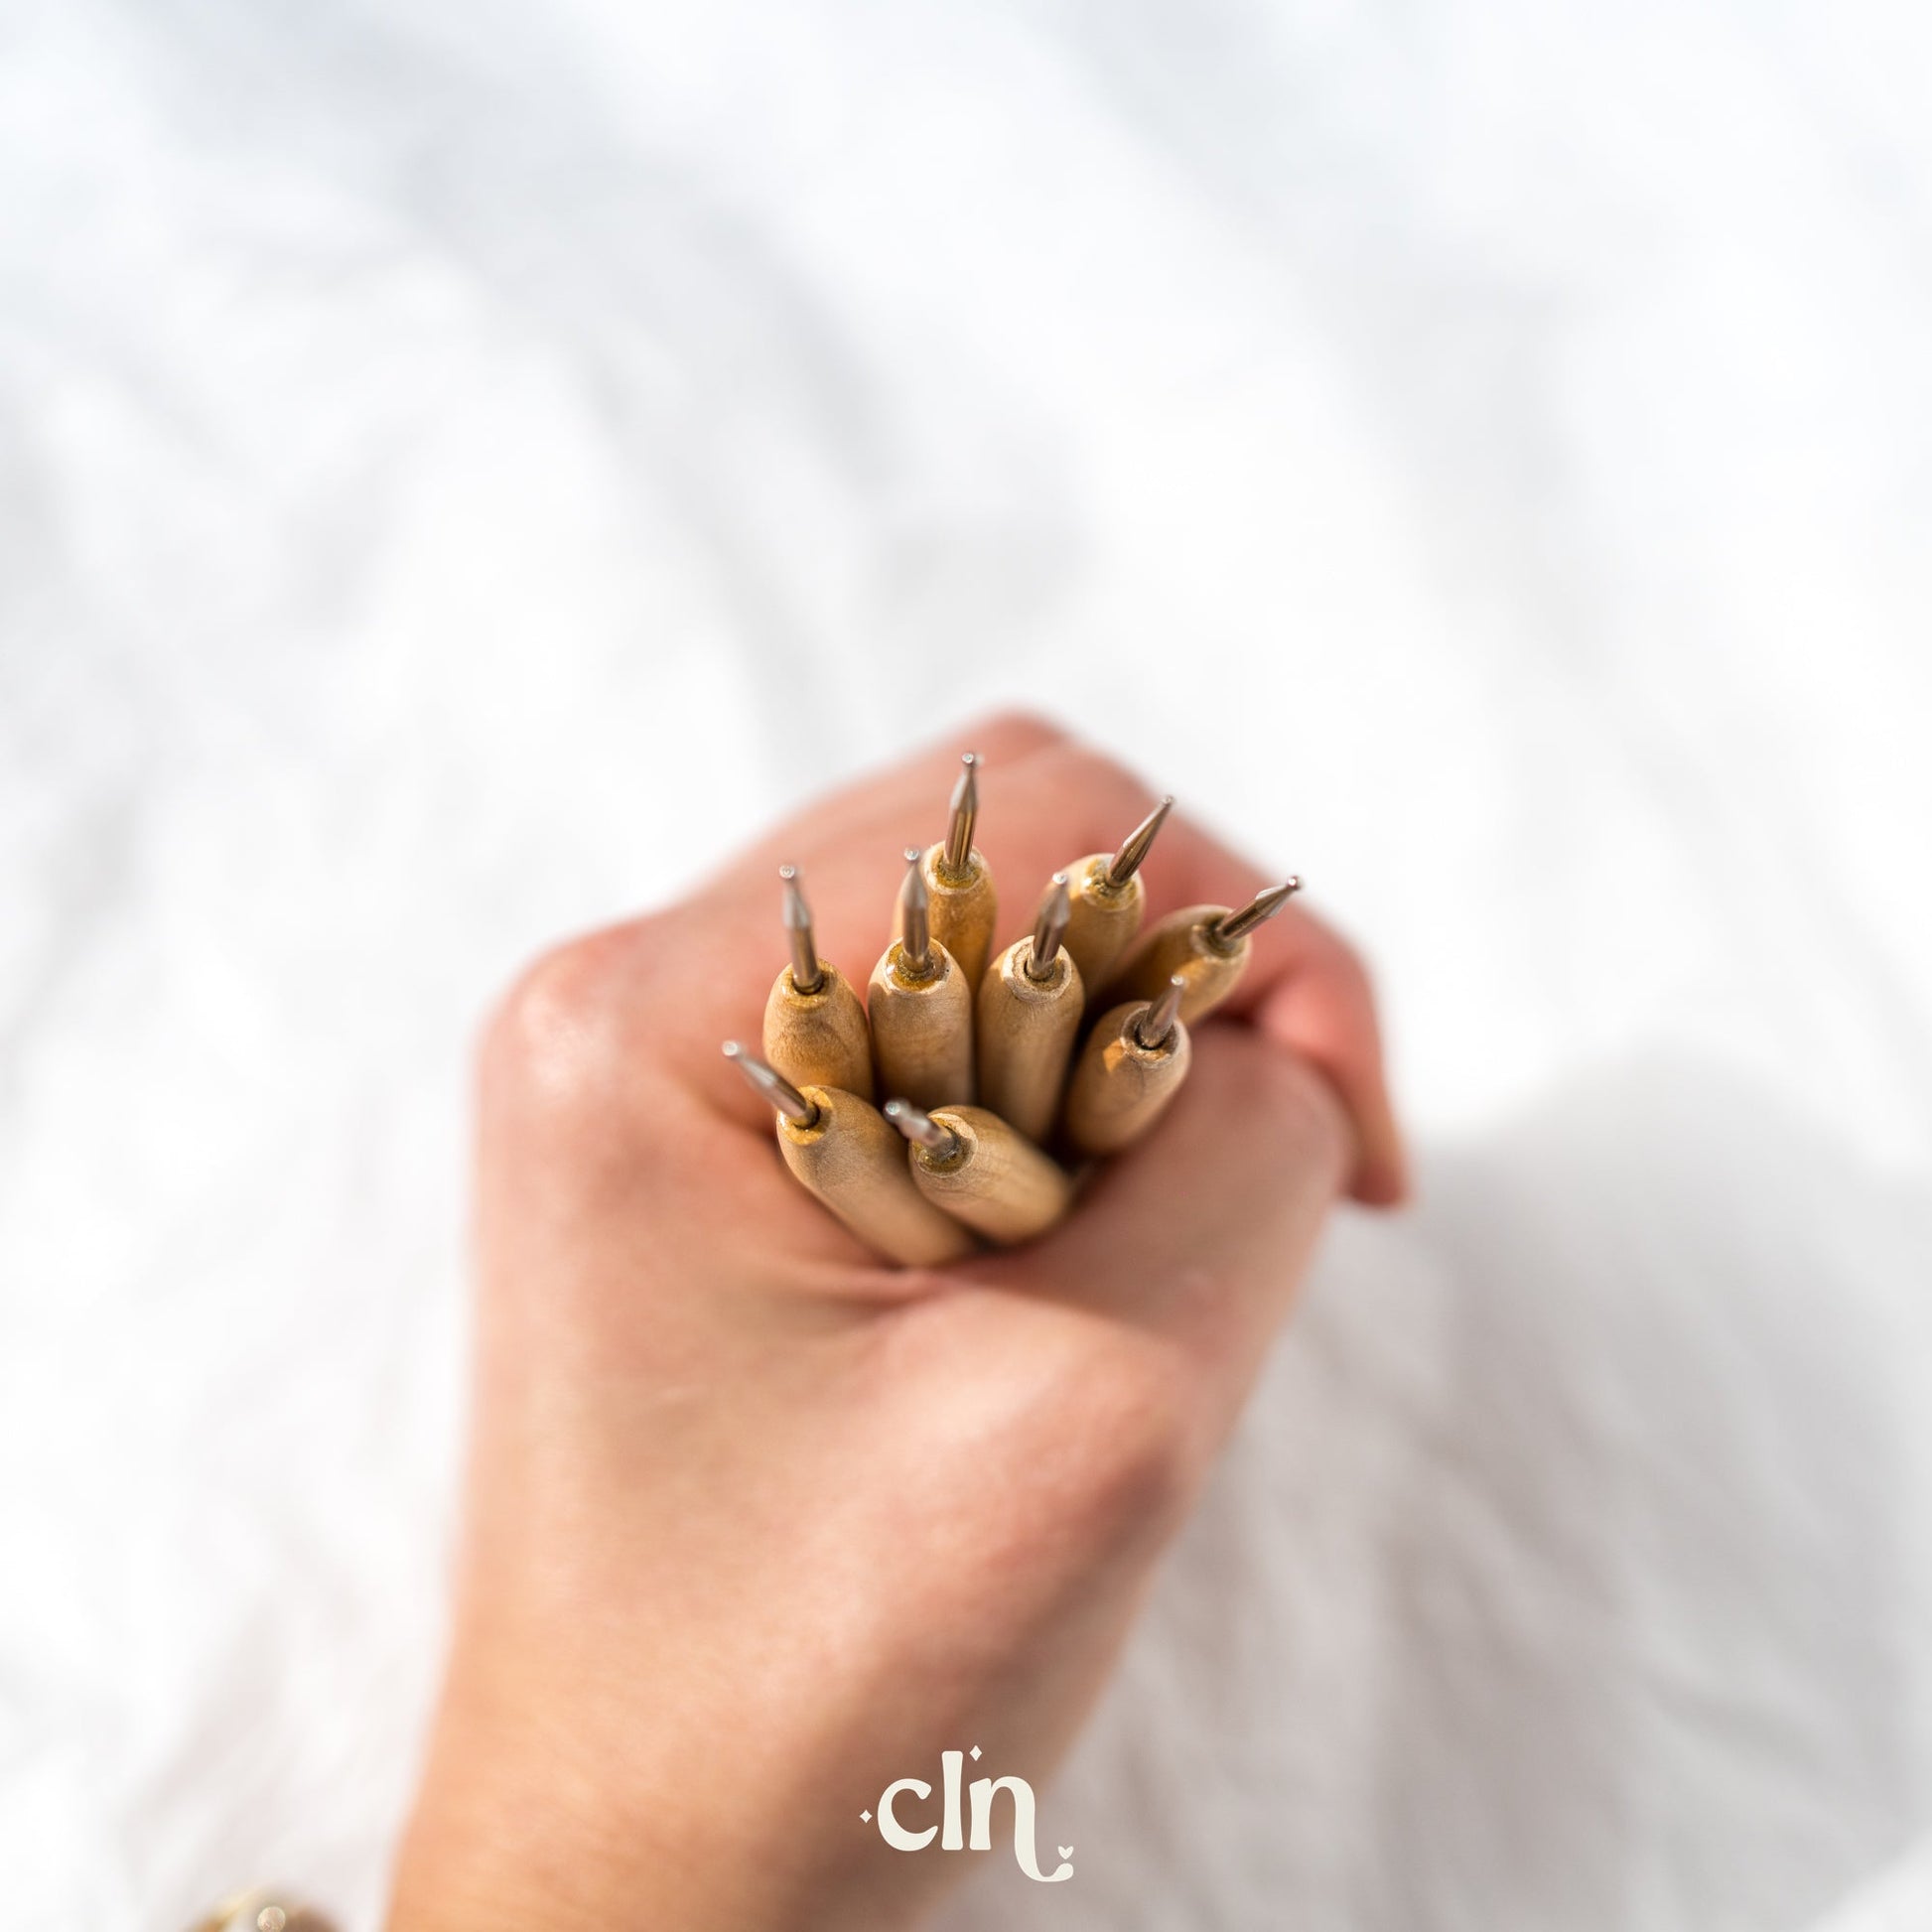 Wooden dotting tool - Curated tools - CLN Atelier